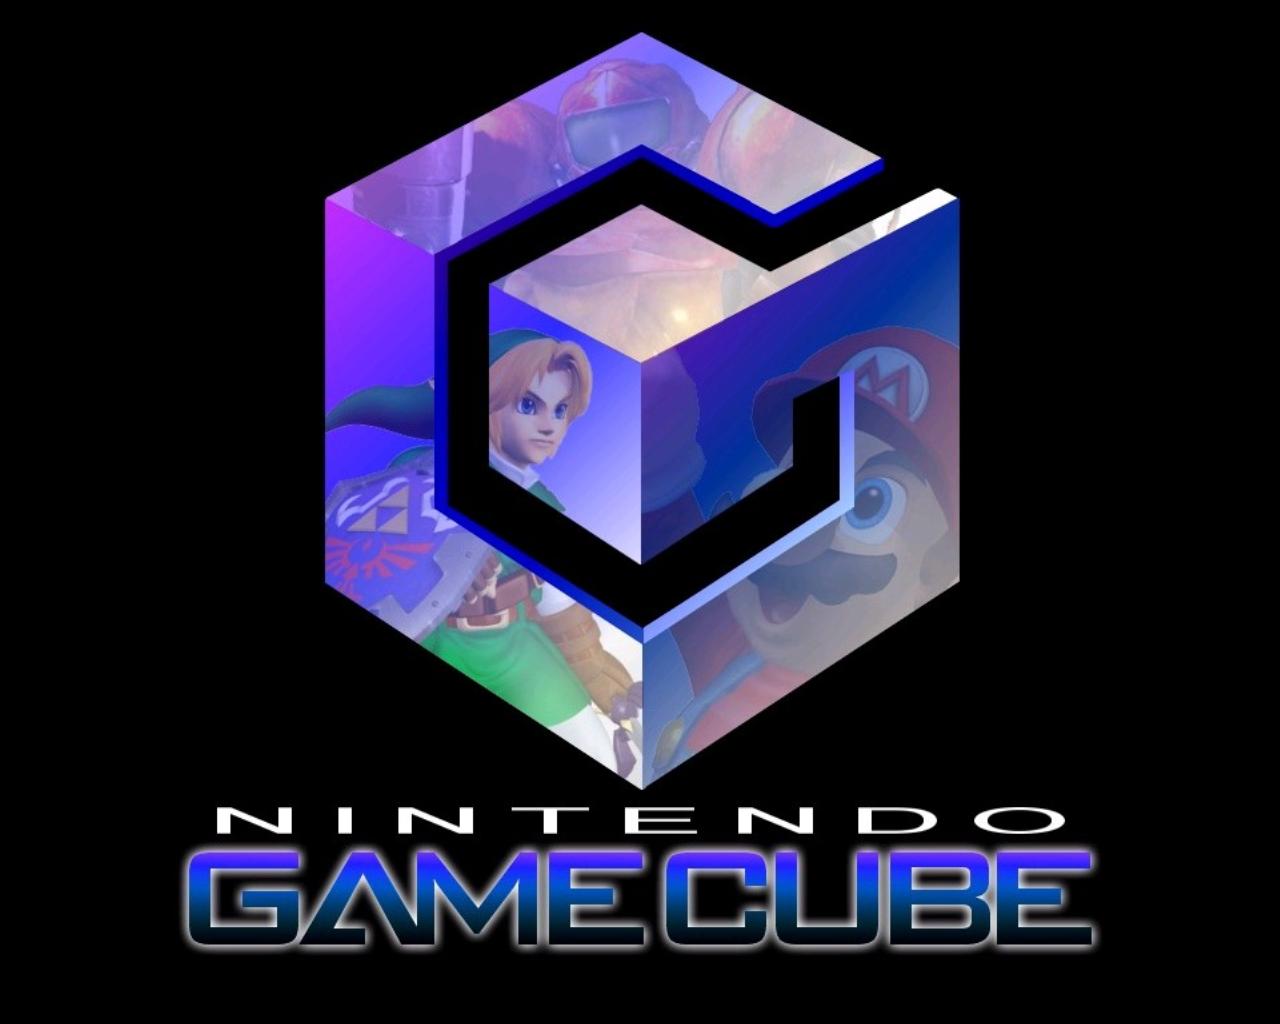 The GameCube logo with a picture of Link from The Legend of Zelda: The Wind Waker in the background. - Nintendo